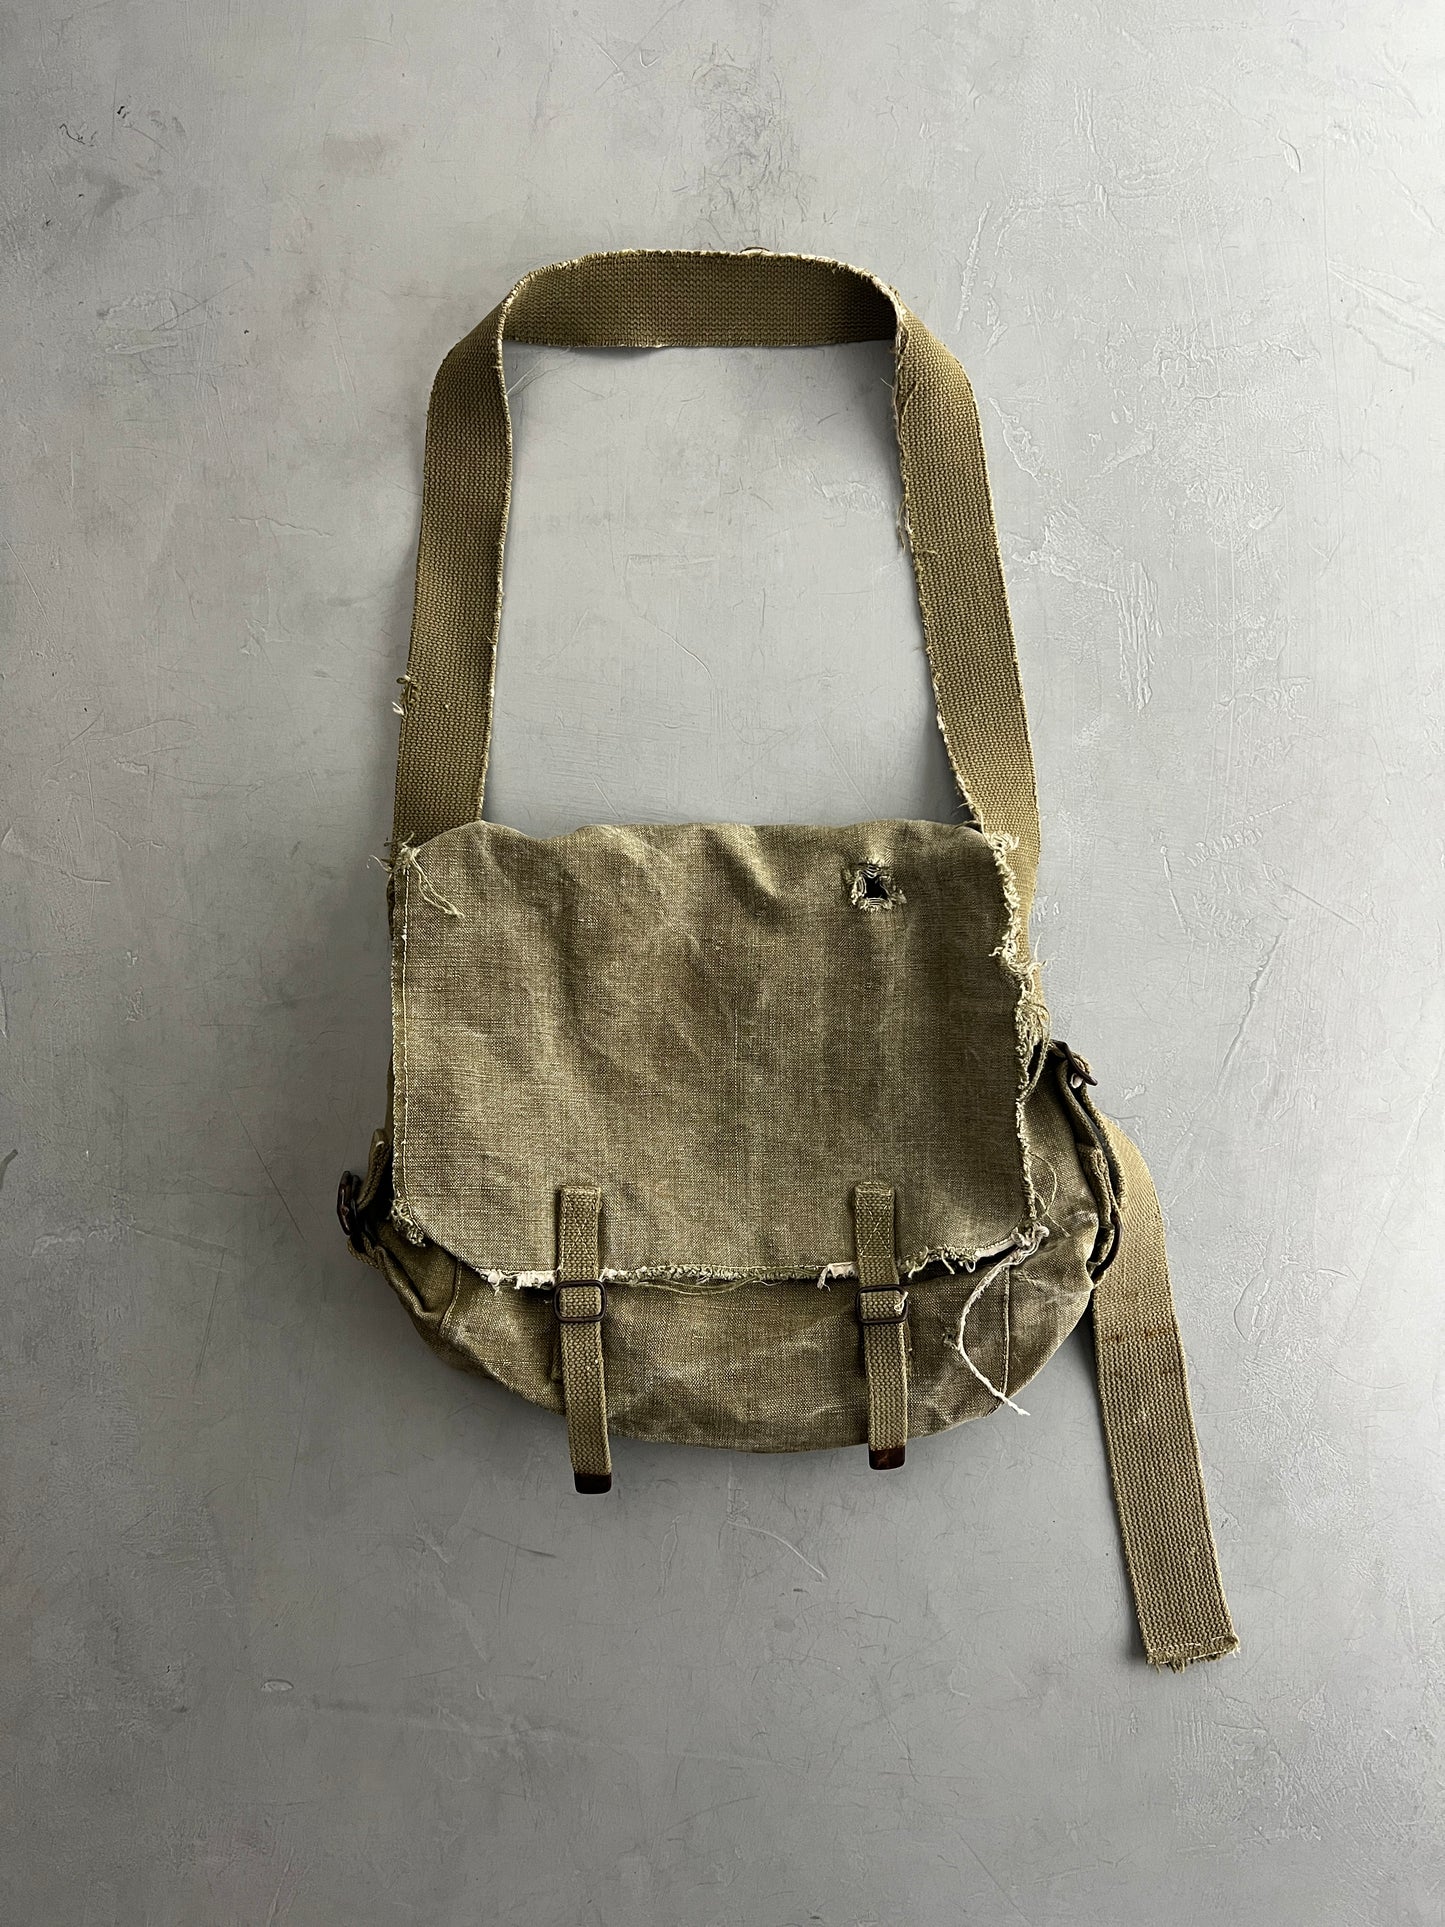 French Army Canvas Satchel